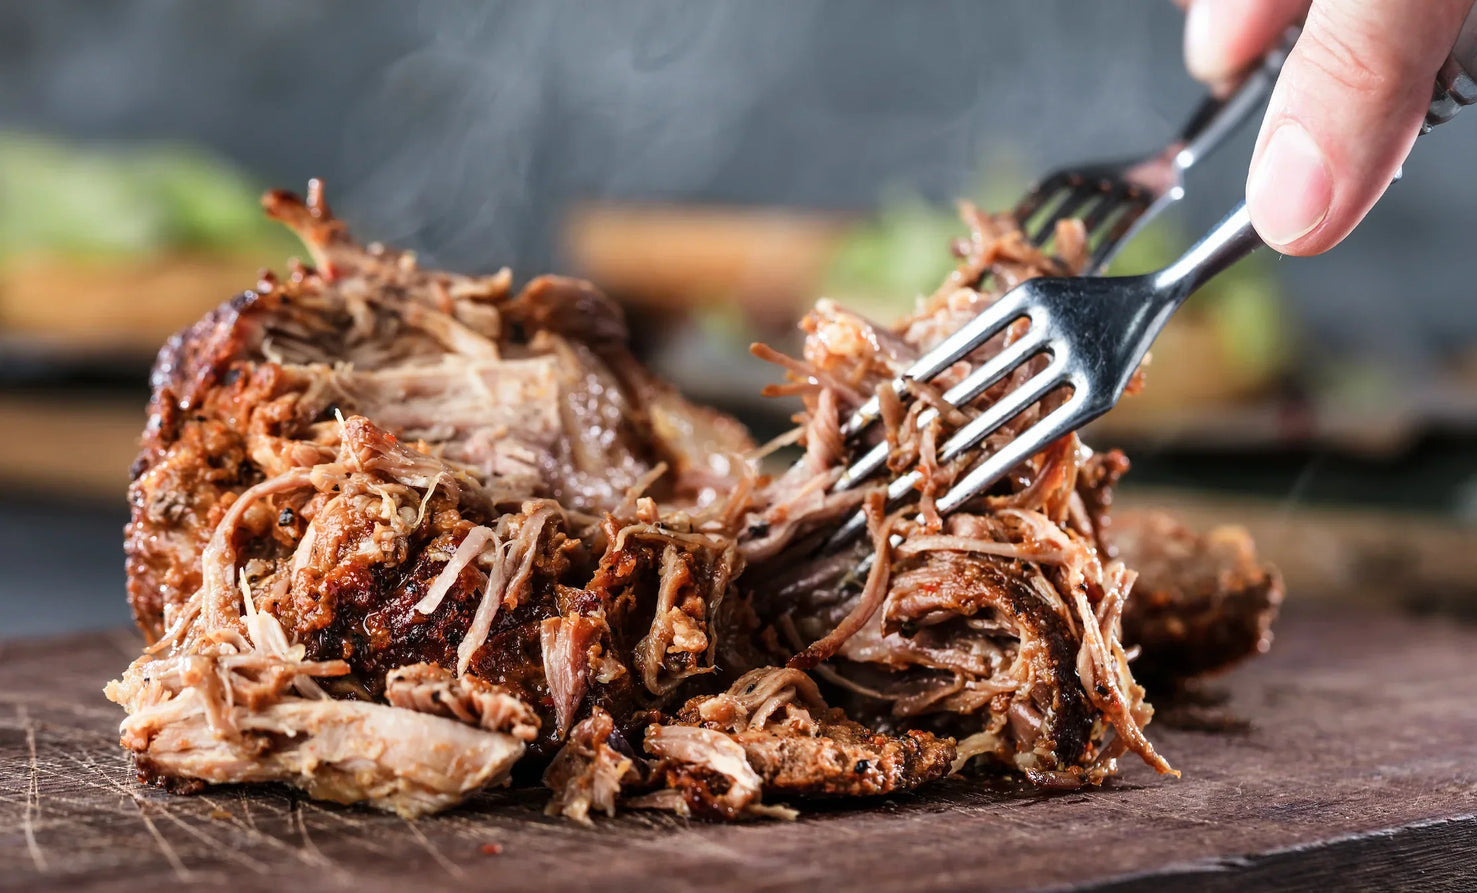 How To Store Pulled Pork